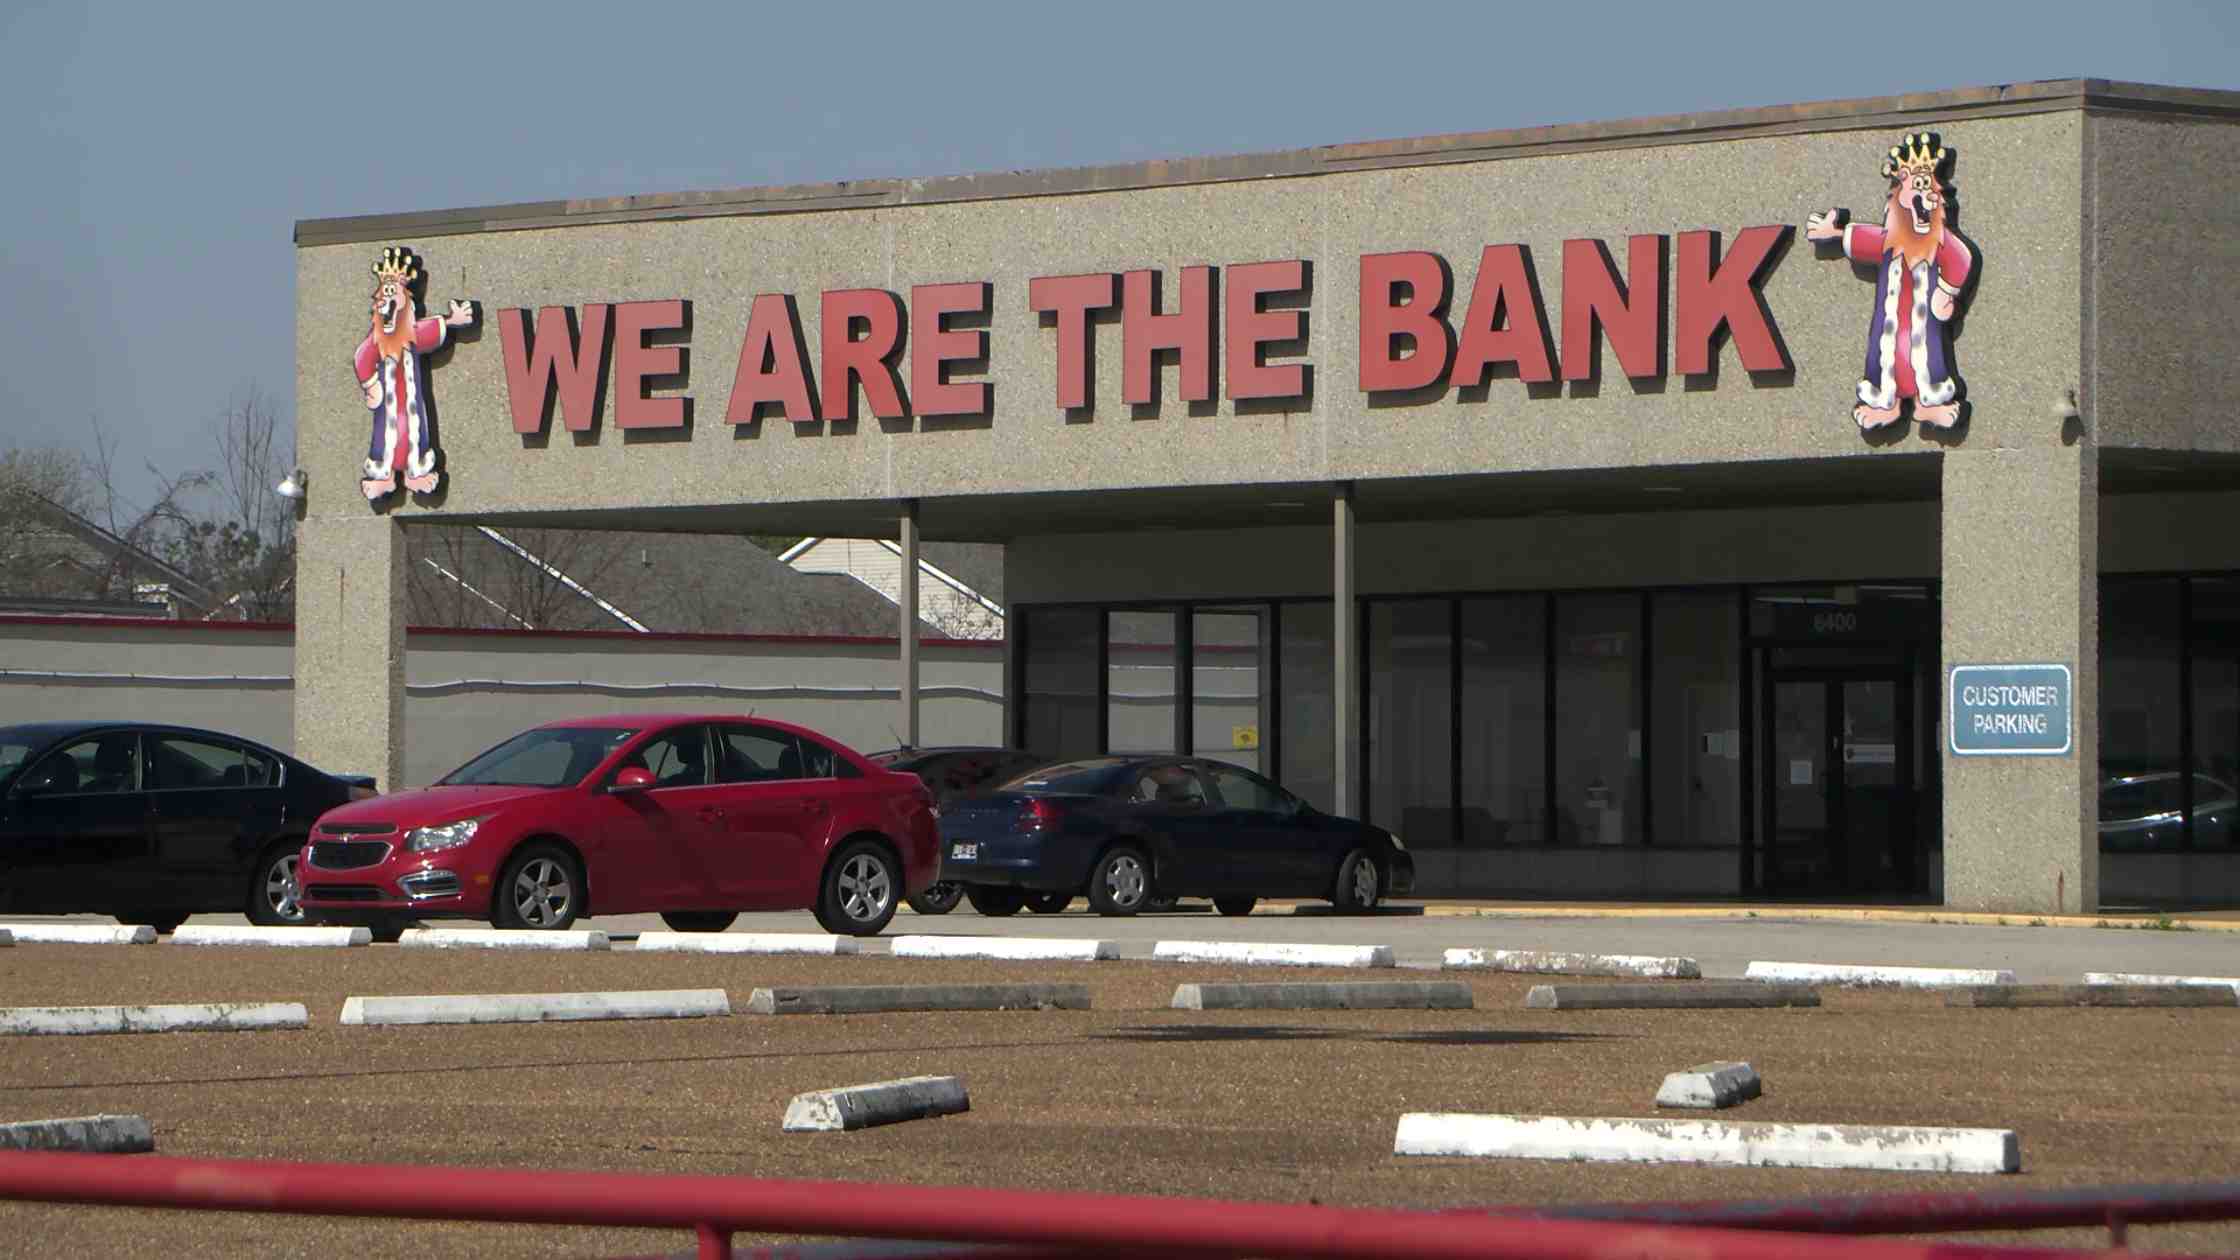 American Financial Closed: why did they shut down and close all stores?